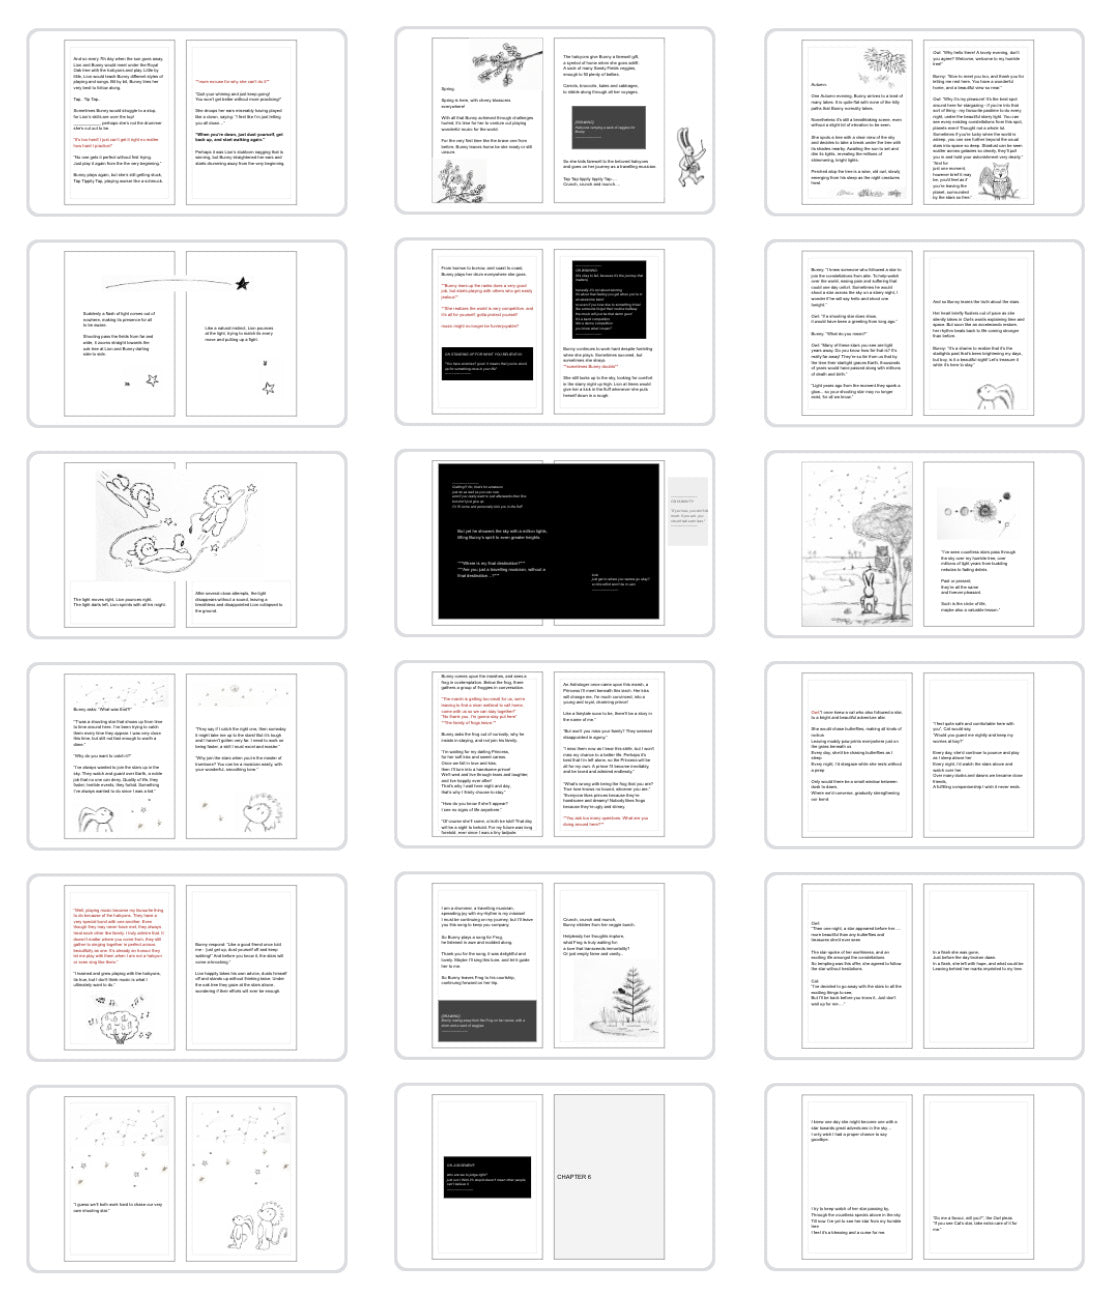 Image thumbnails of inside pages of the first draft layout